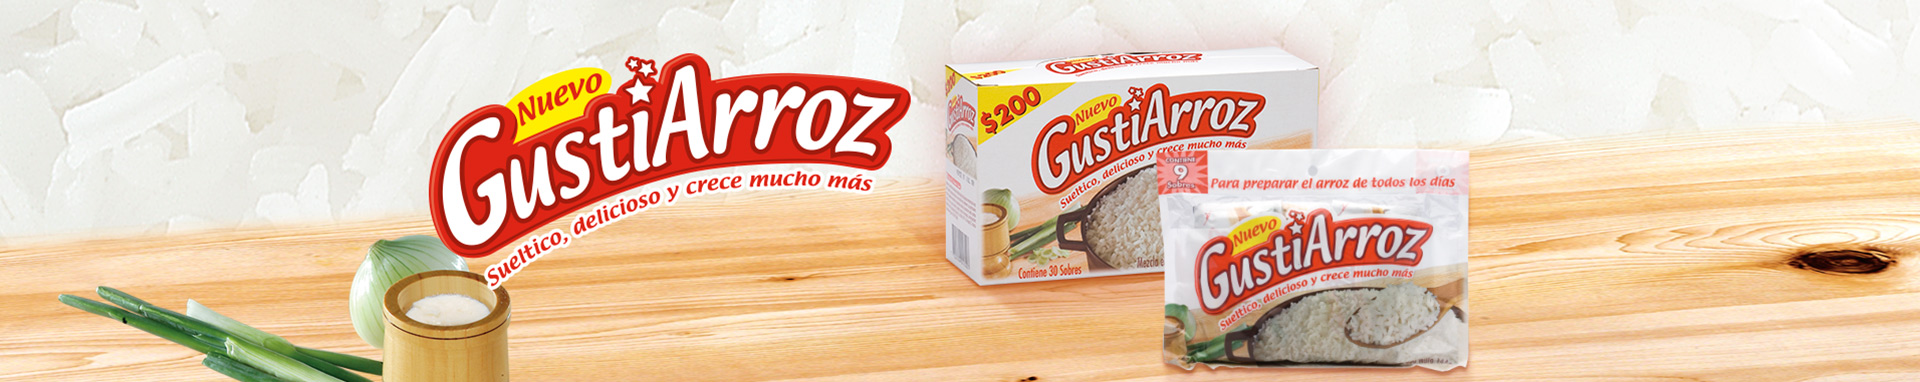 Banners_gustiarroz